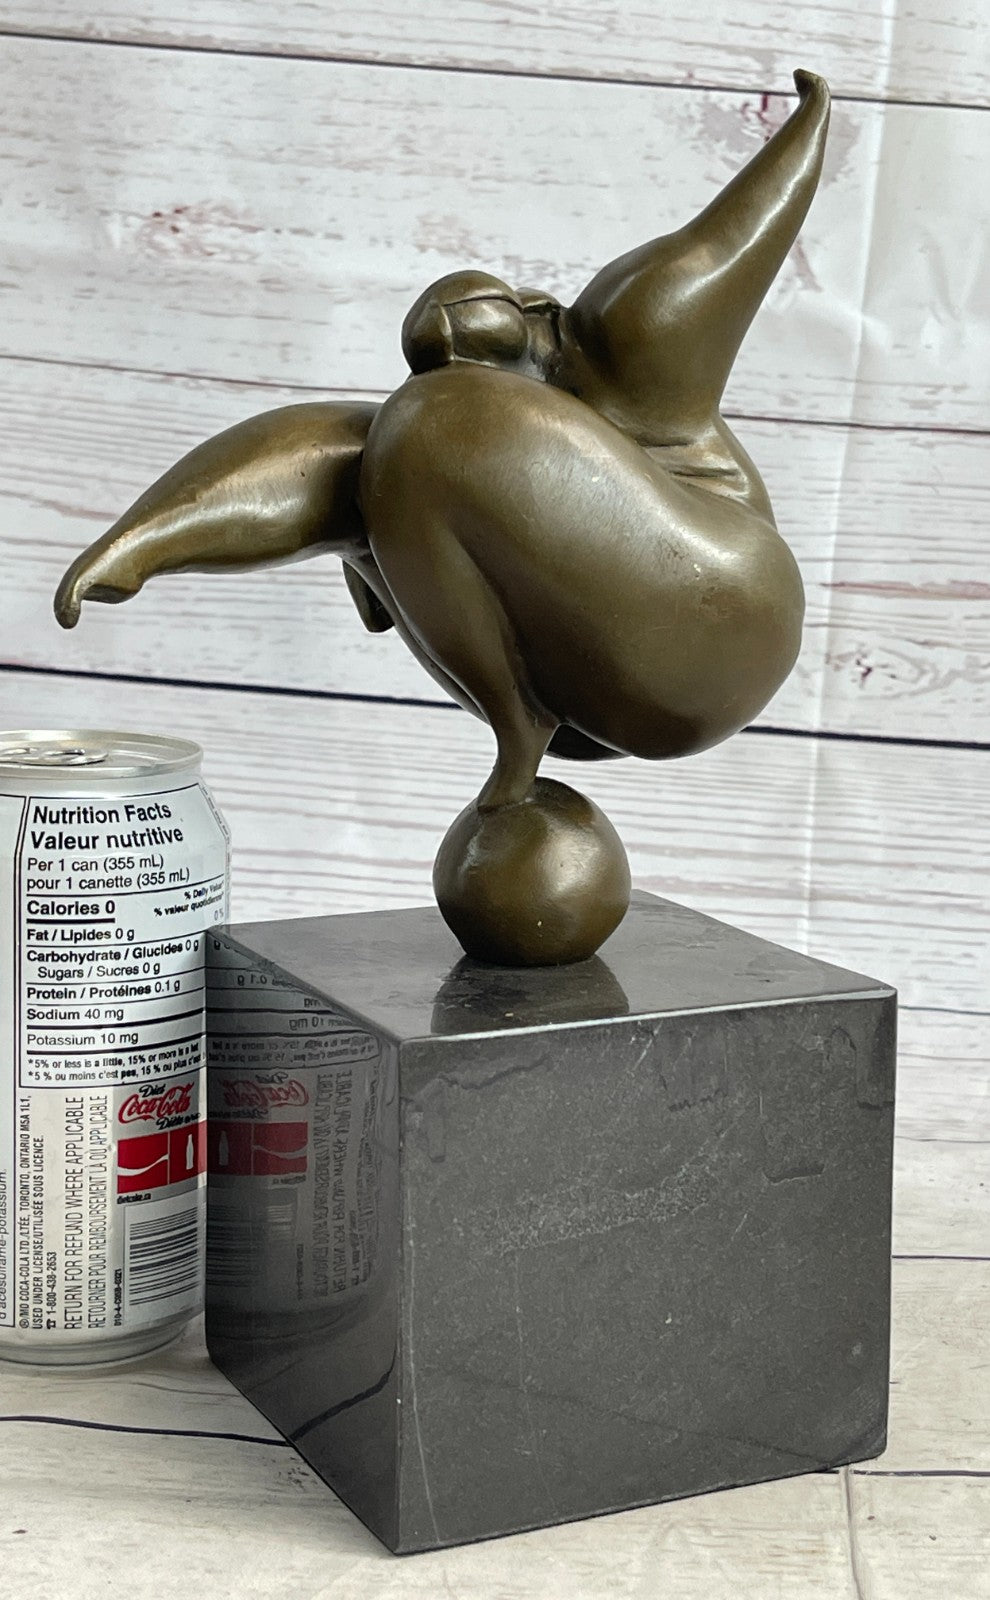 ABSTRACT SOLID BRONZE*DANCER*SCULPTURE FRENCH MILO MID CENTURY MODERNIST SALE